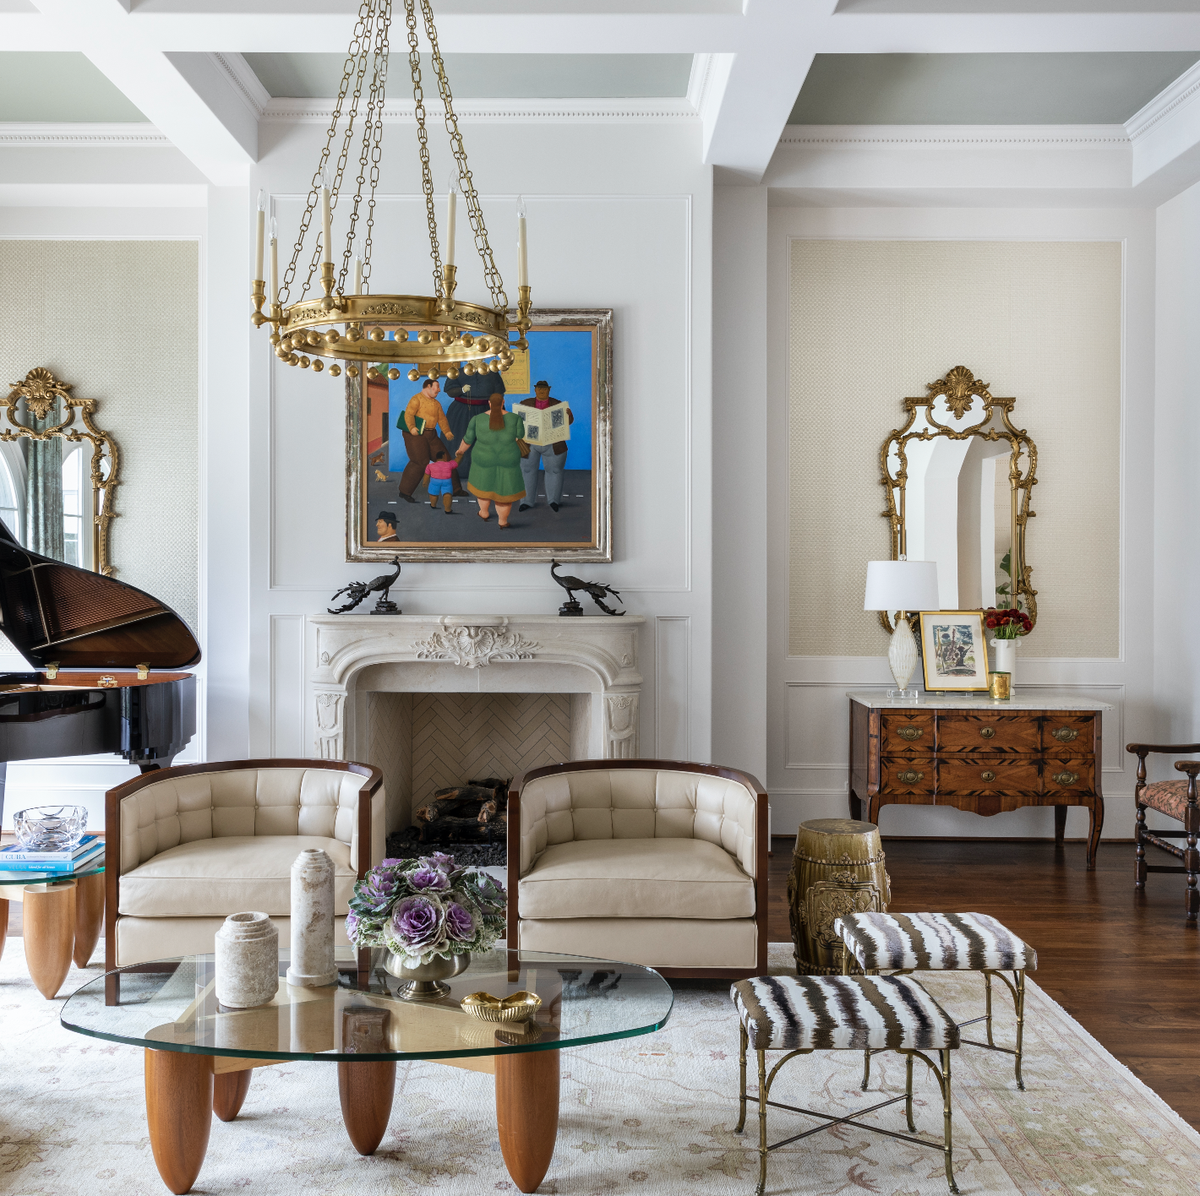 This Texas Home Blends Art Deco and Mediterranean Styles